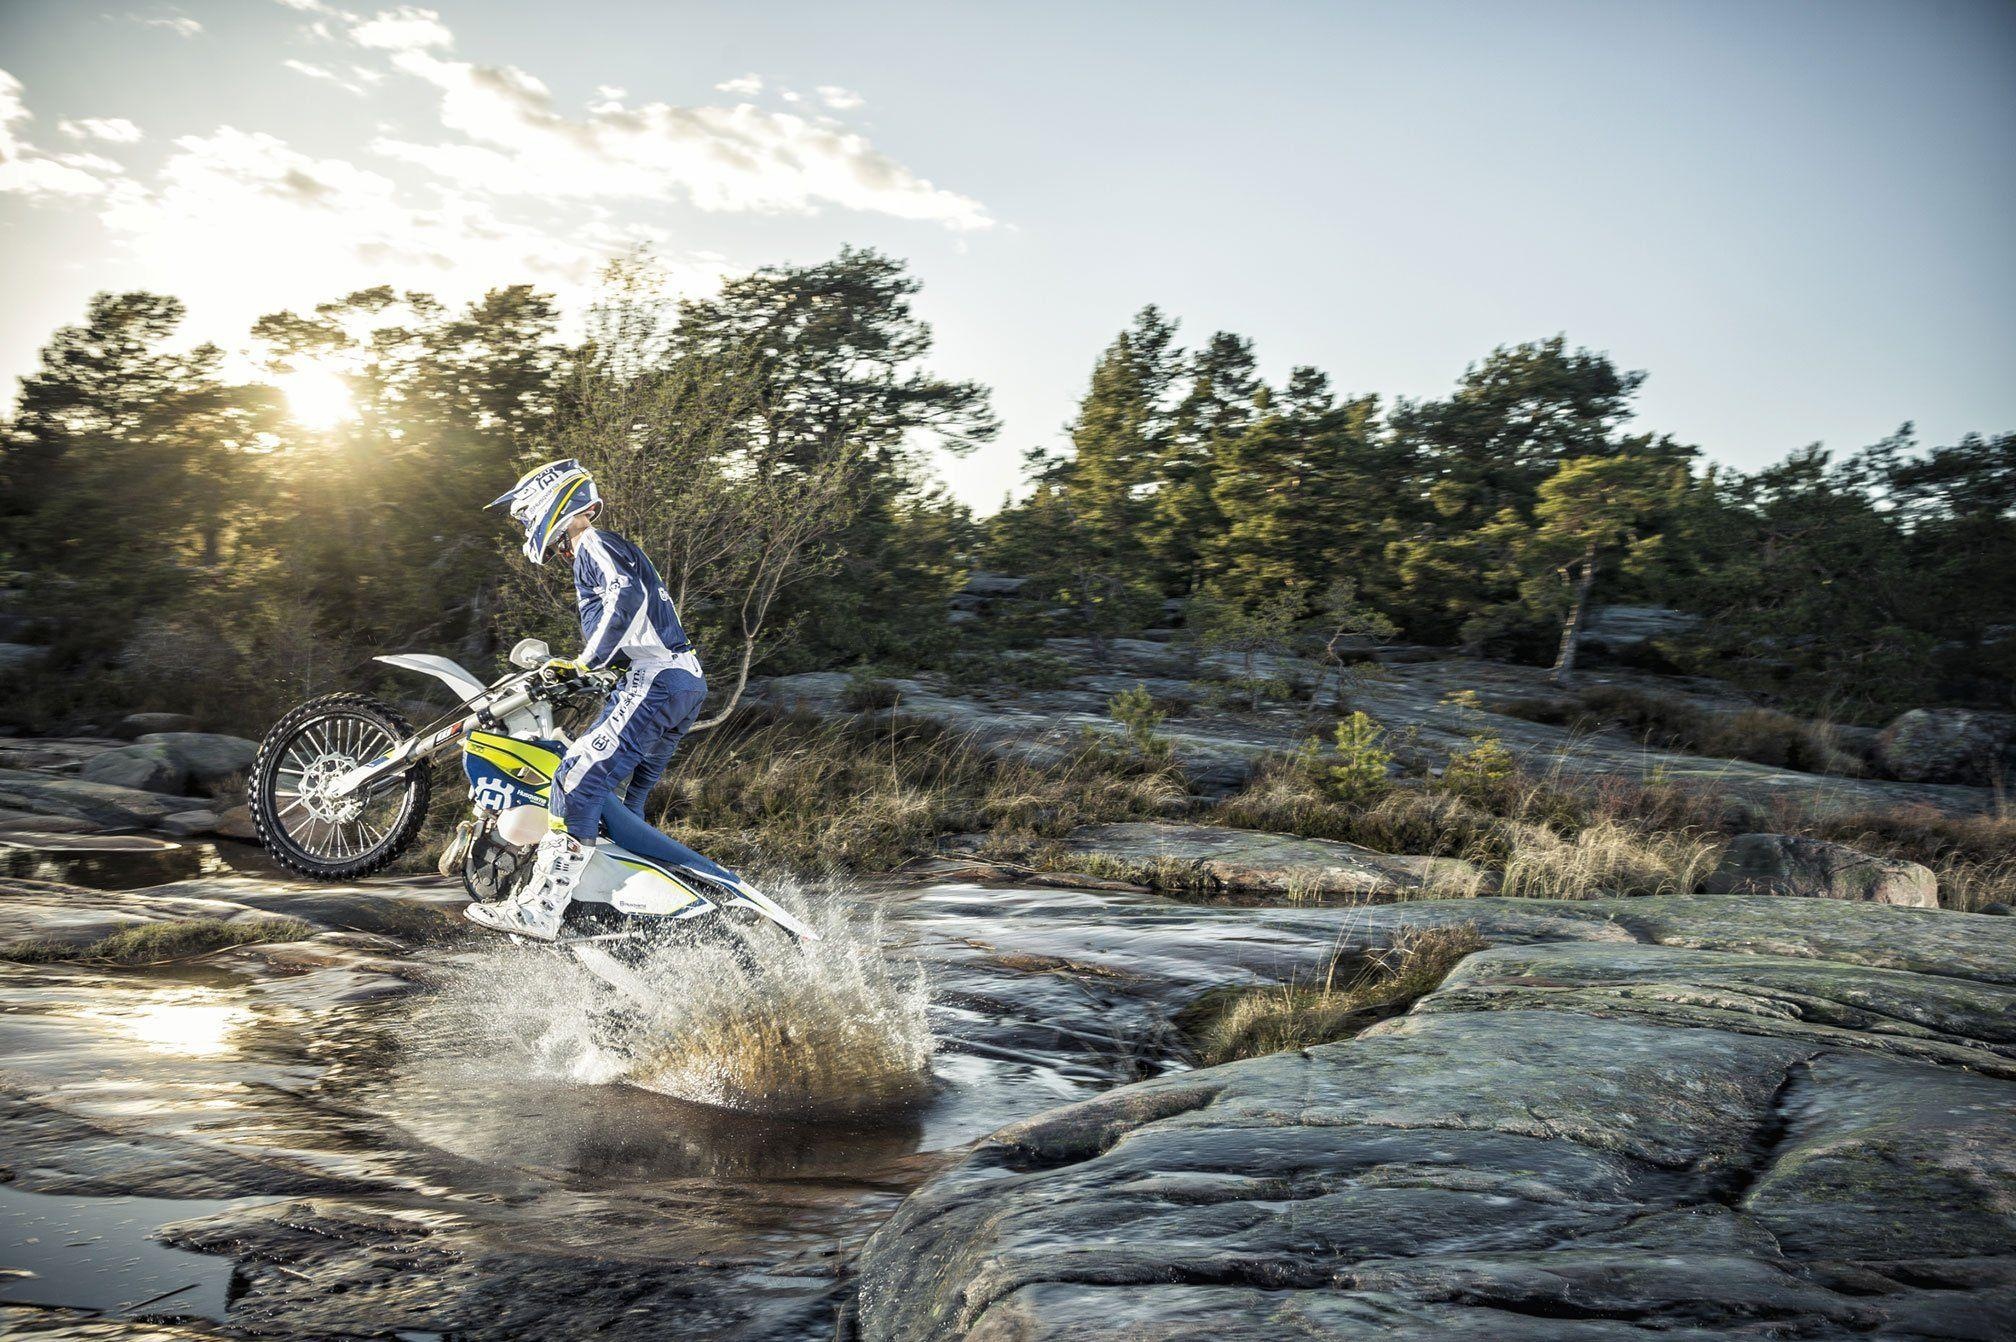 Enduro Motorbike: Crazy Stunts on The Moutain River, Husqvarna, Motorsports Protective Outfit. 2020x1350 HD Background.